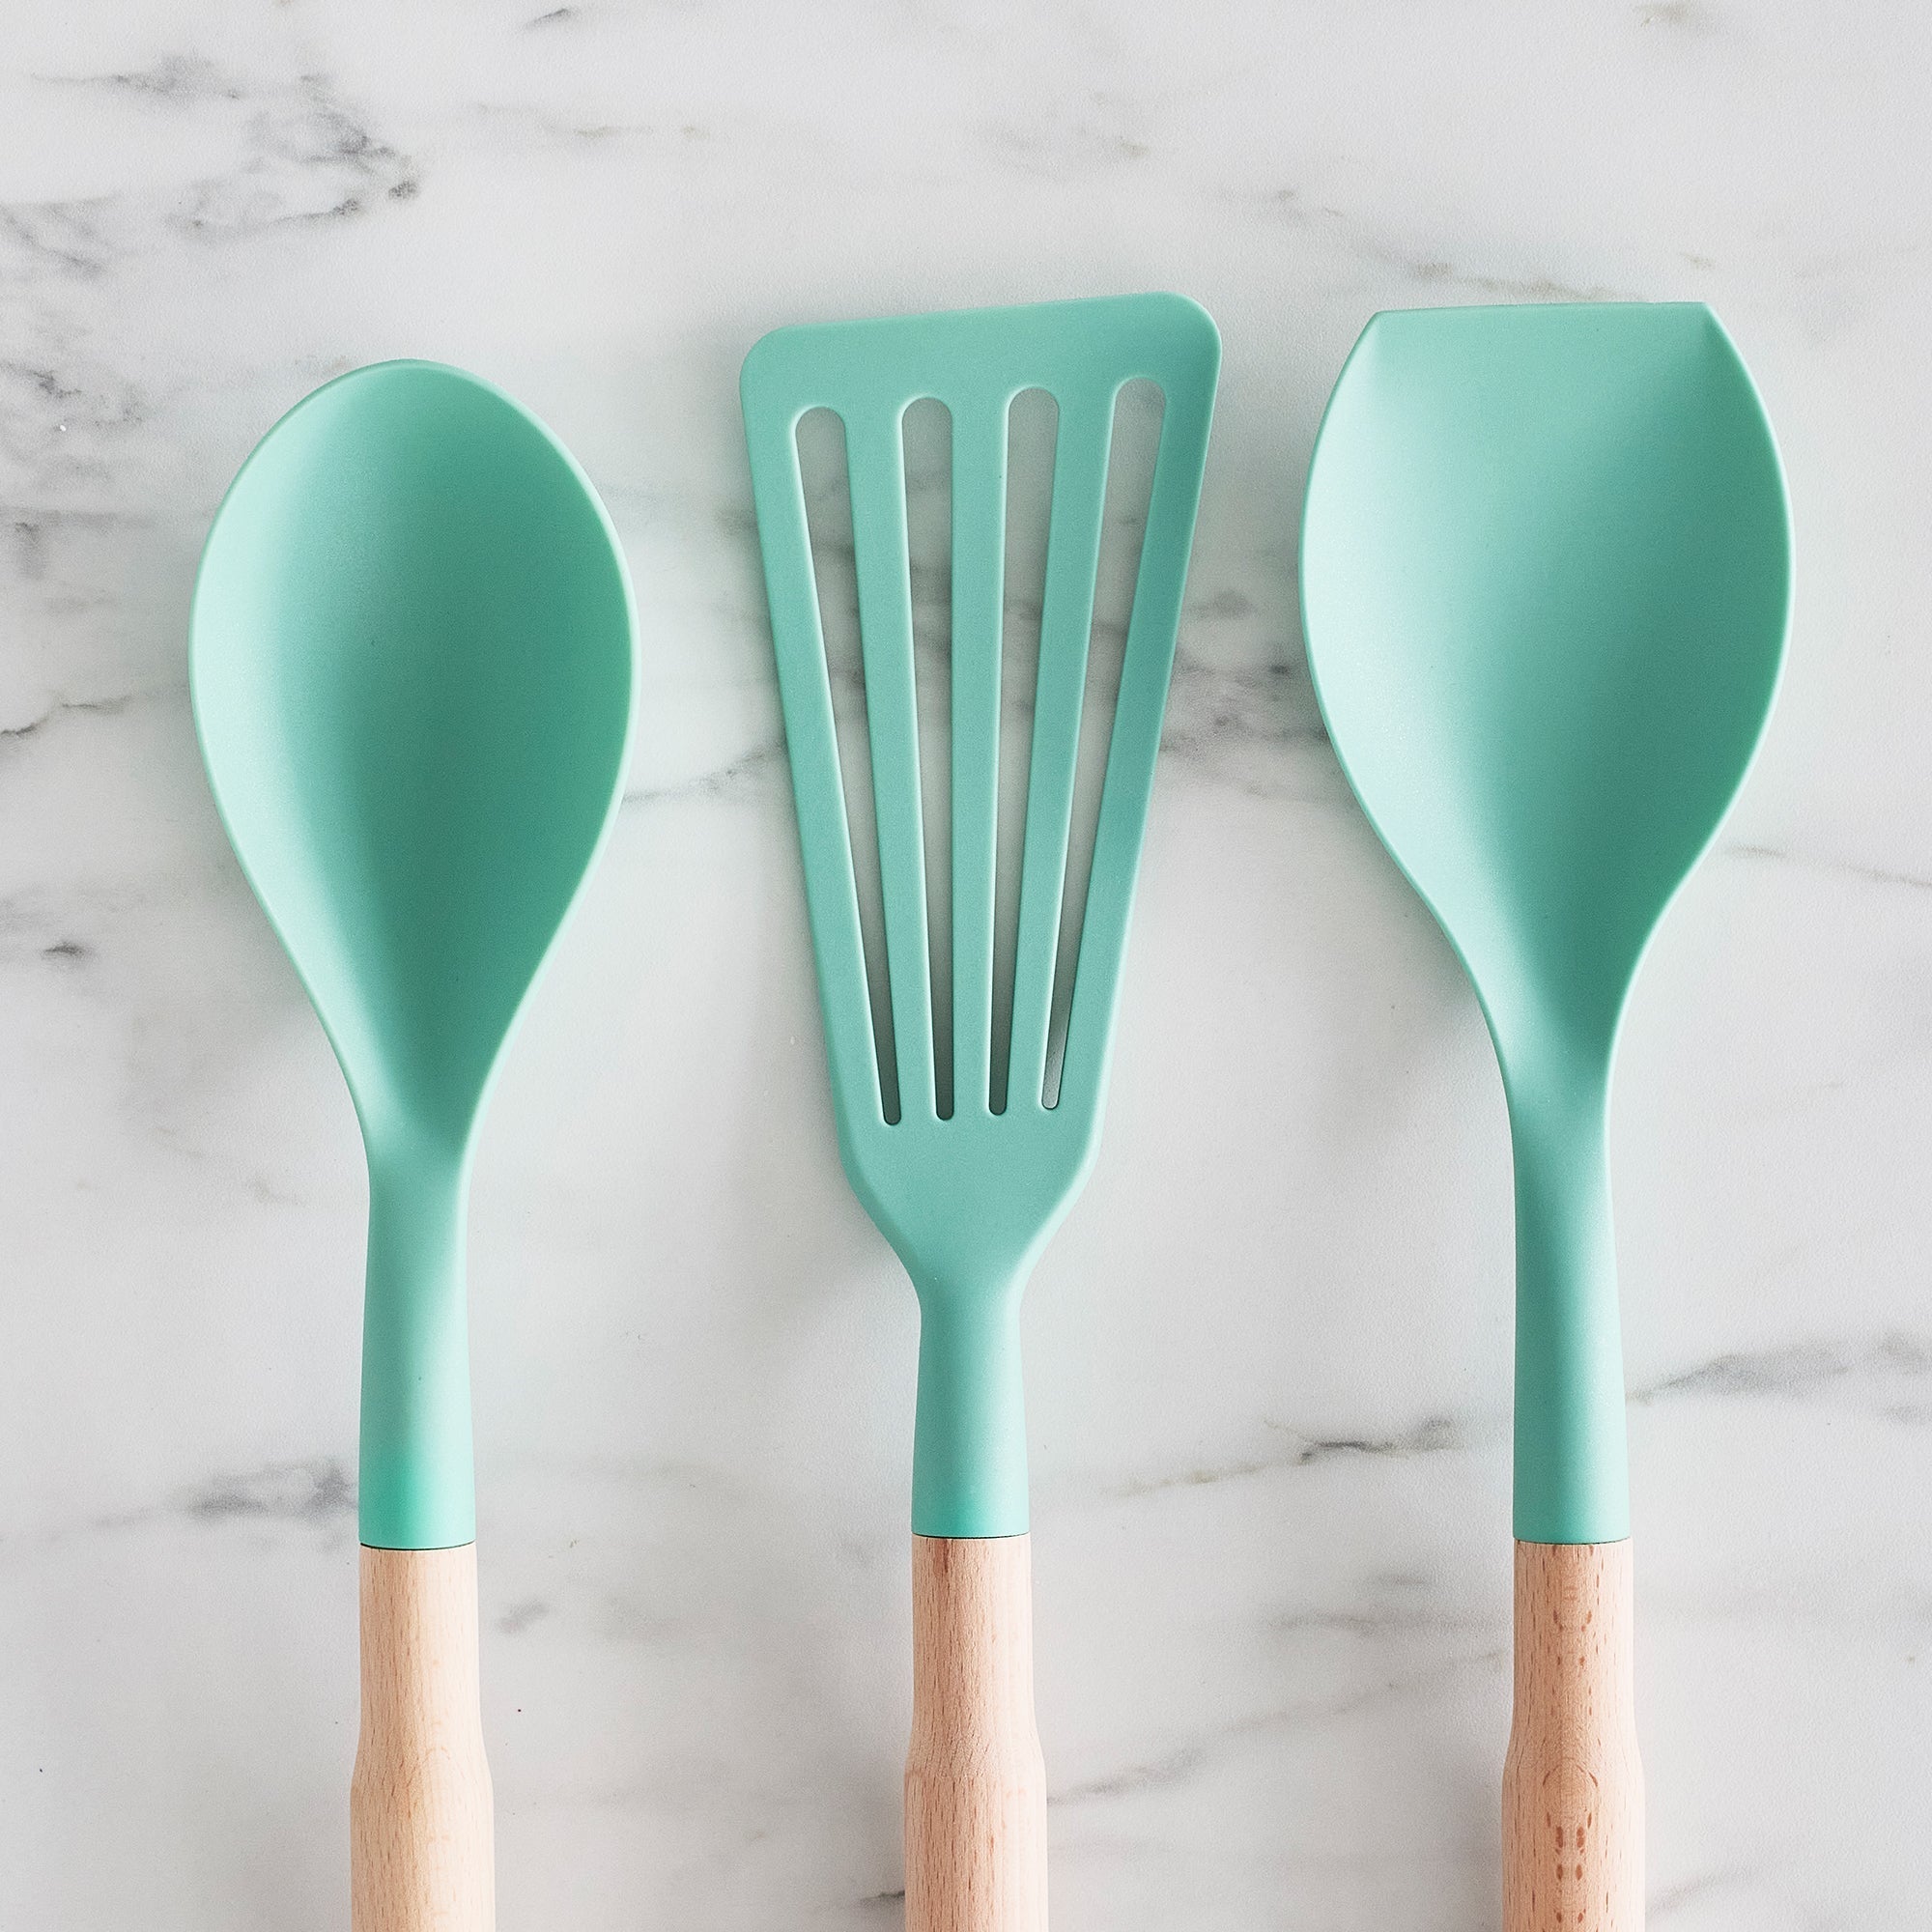 2 Pack Plastic Cooking Ladle/Spatula/Spoon Holder Kitchenware Blue+Green